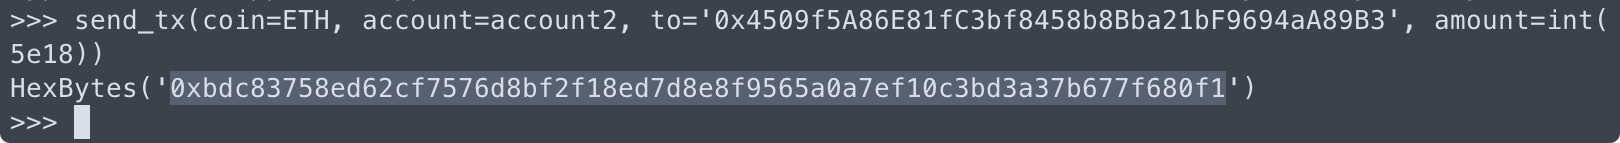 Sending ETH over the testate in the terminal